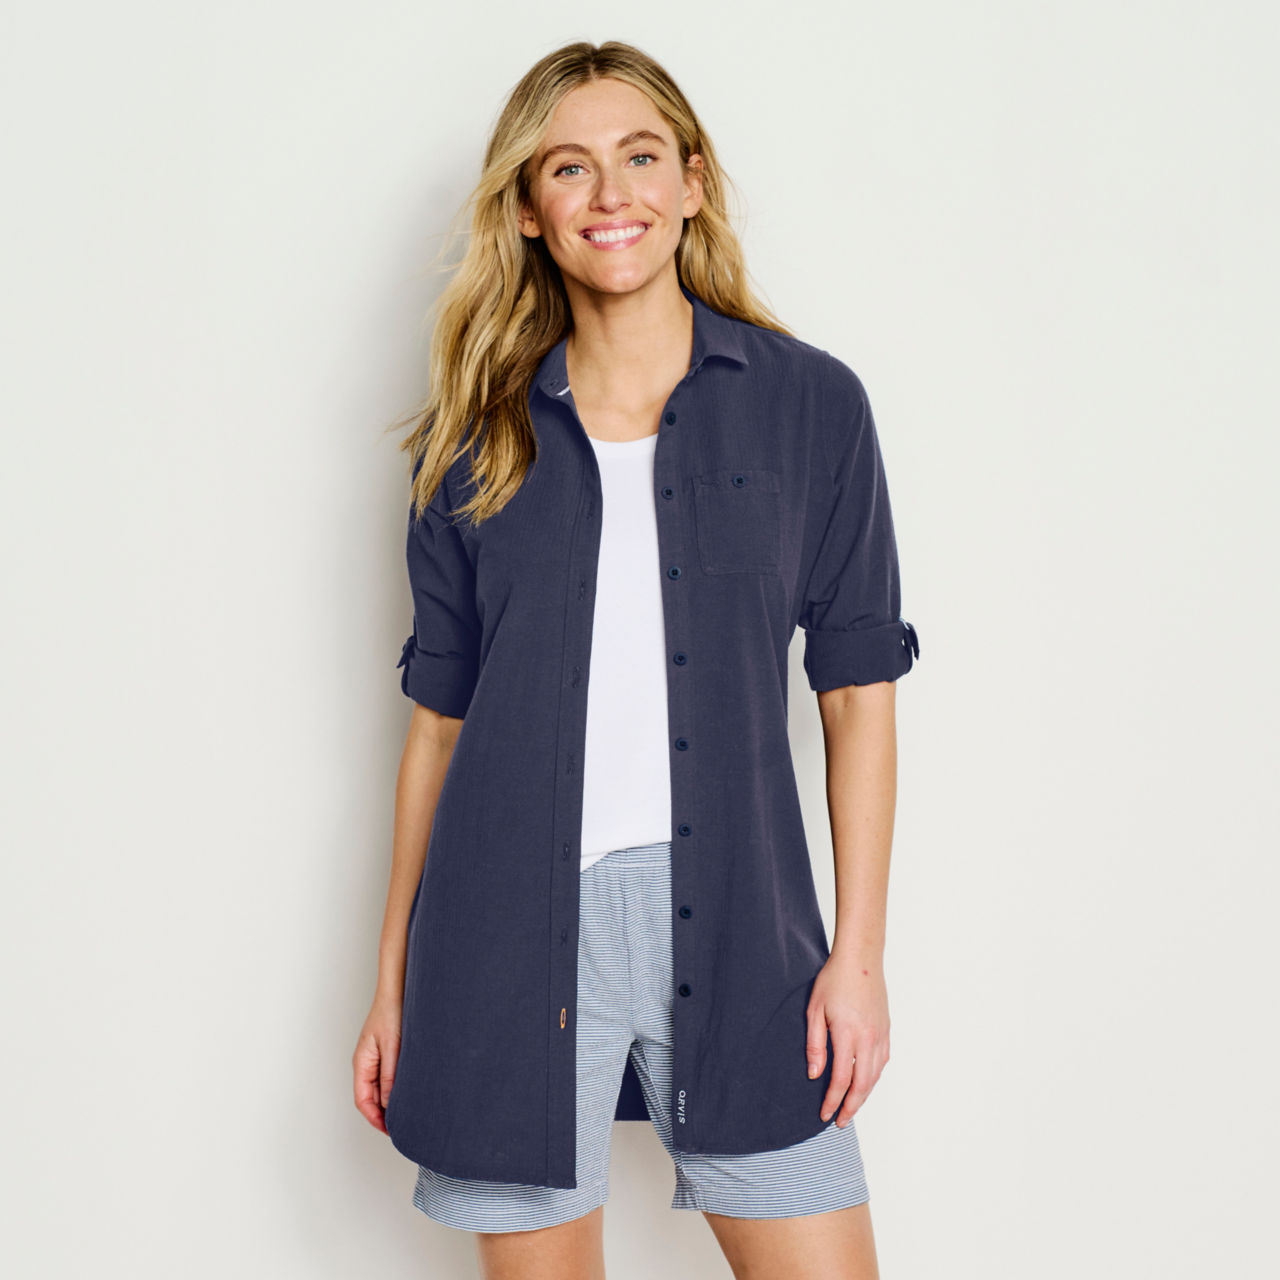 Surf Cast Tunic - BLUE MOON image number 1